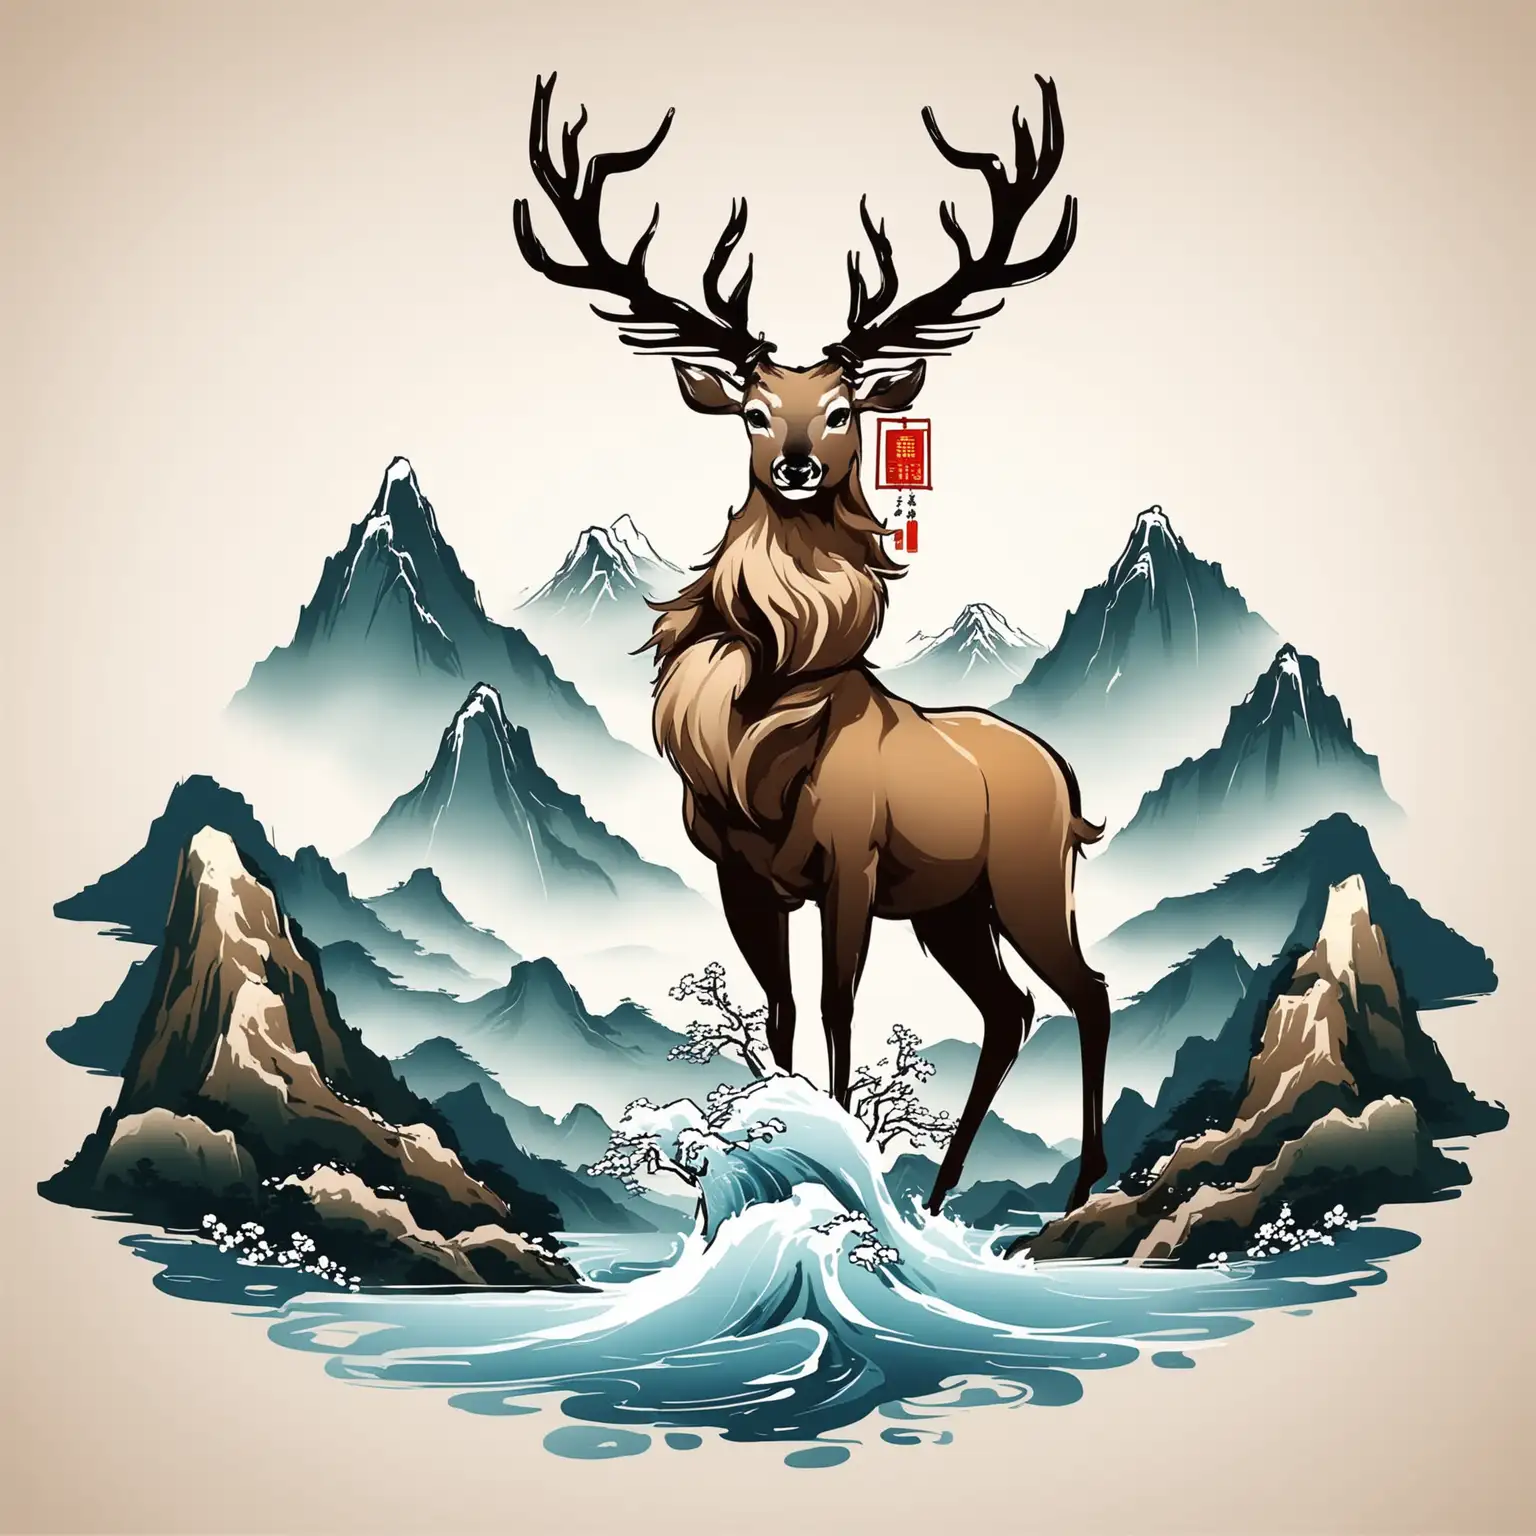 Tranquil-Chinese-Mountain-and-Water-Style-Deer-Head-Illustration